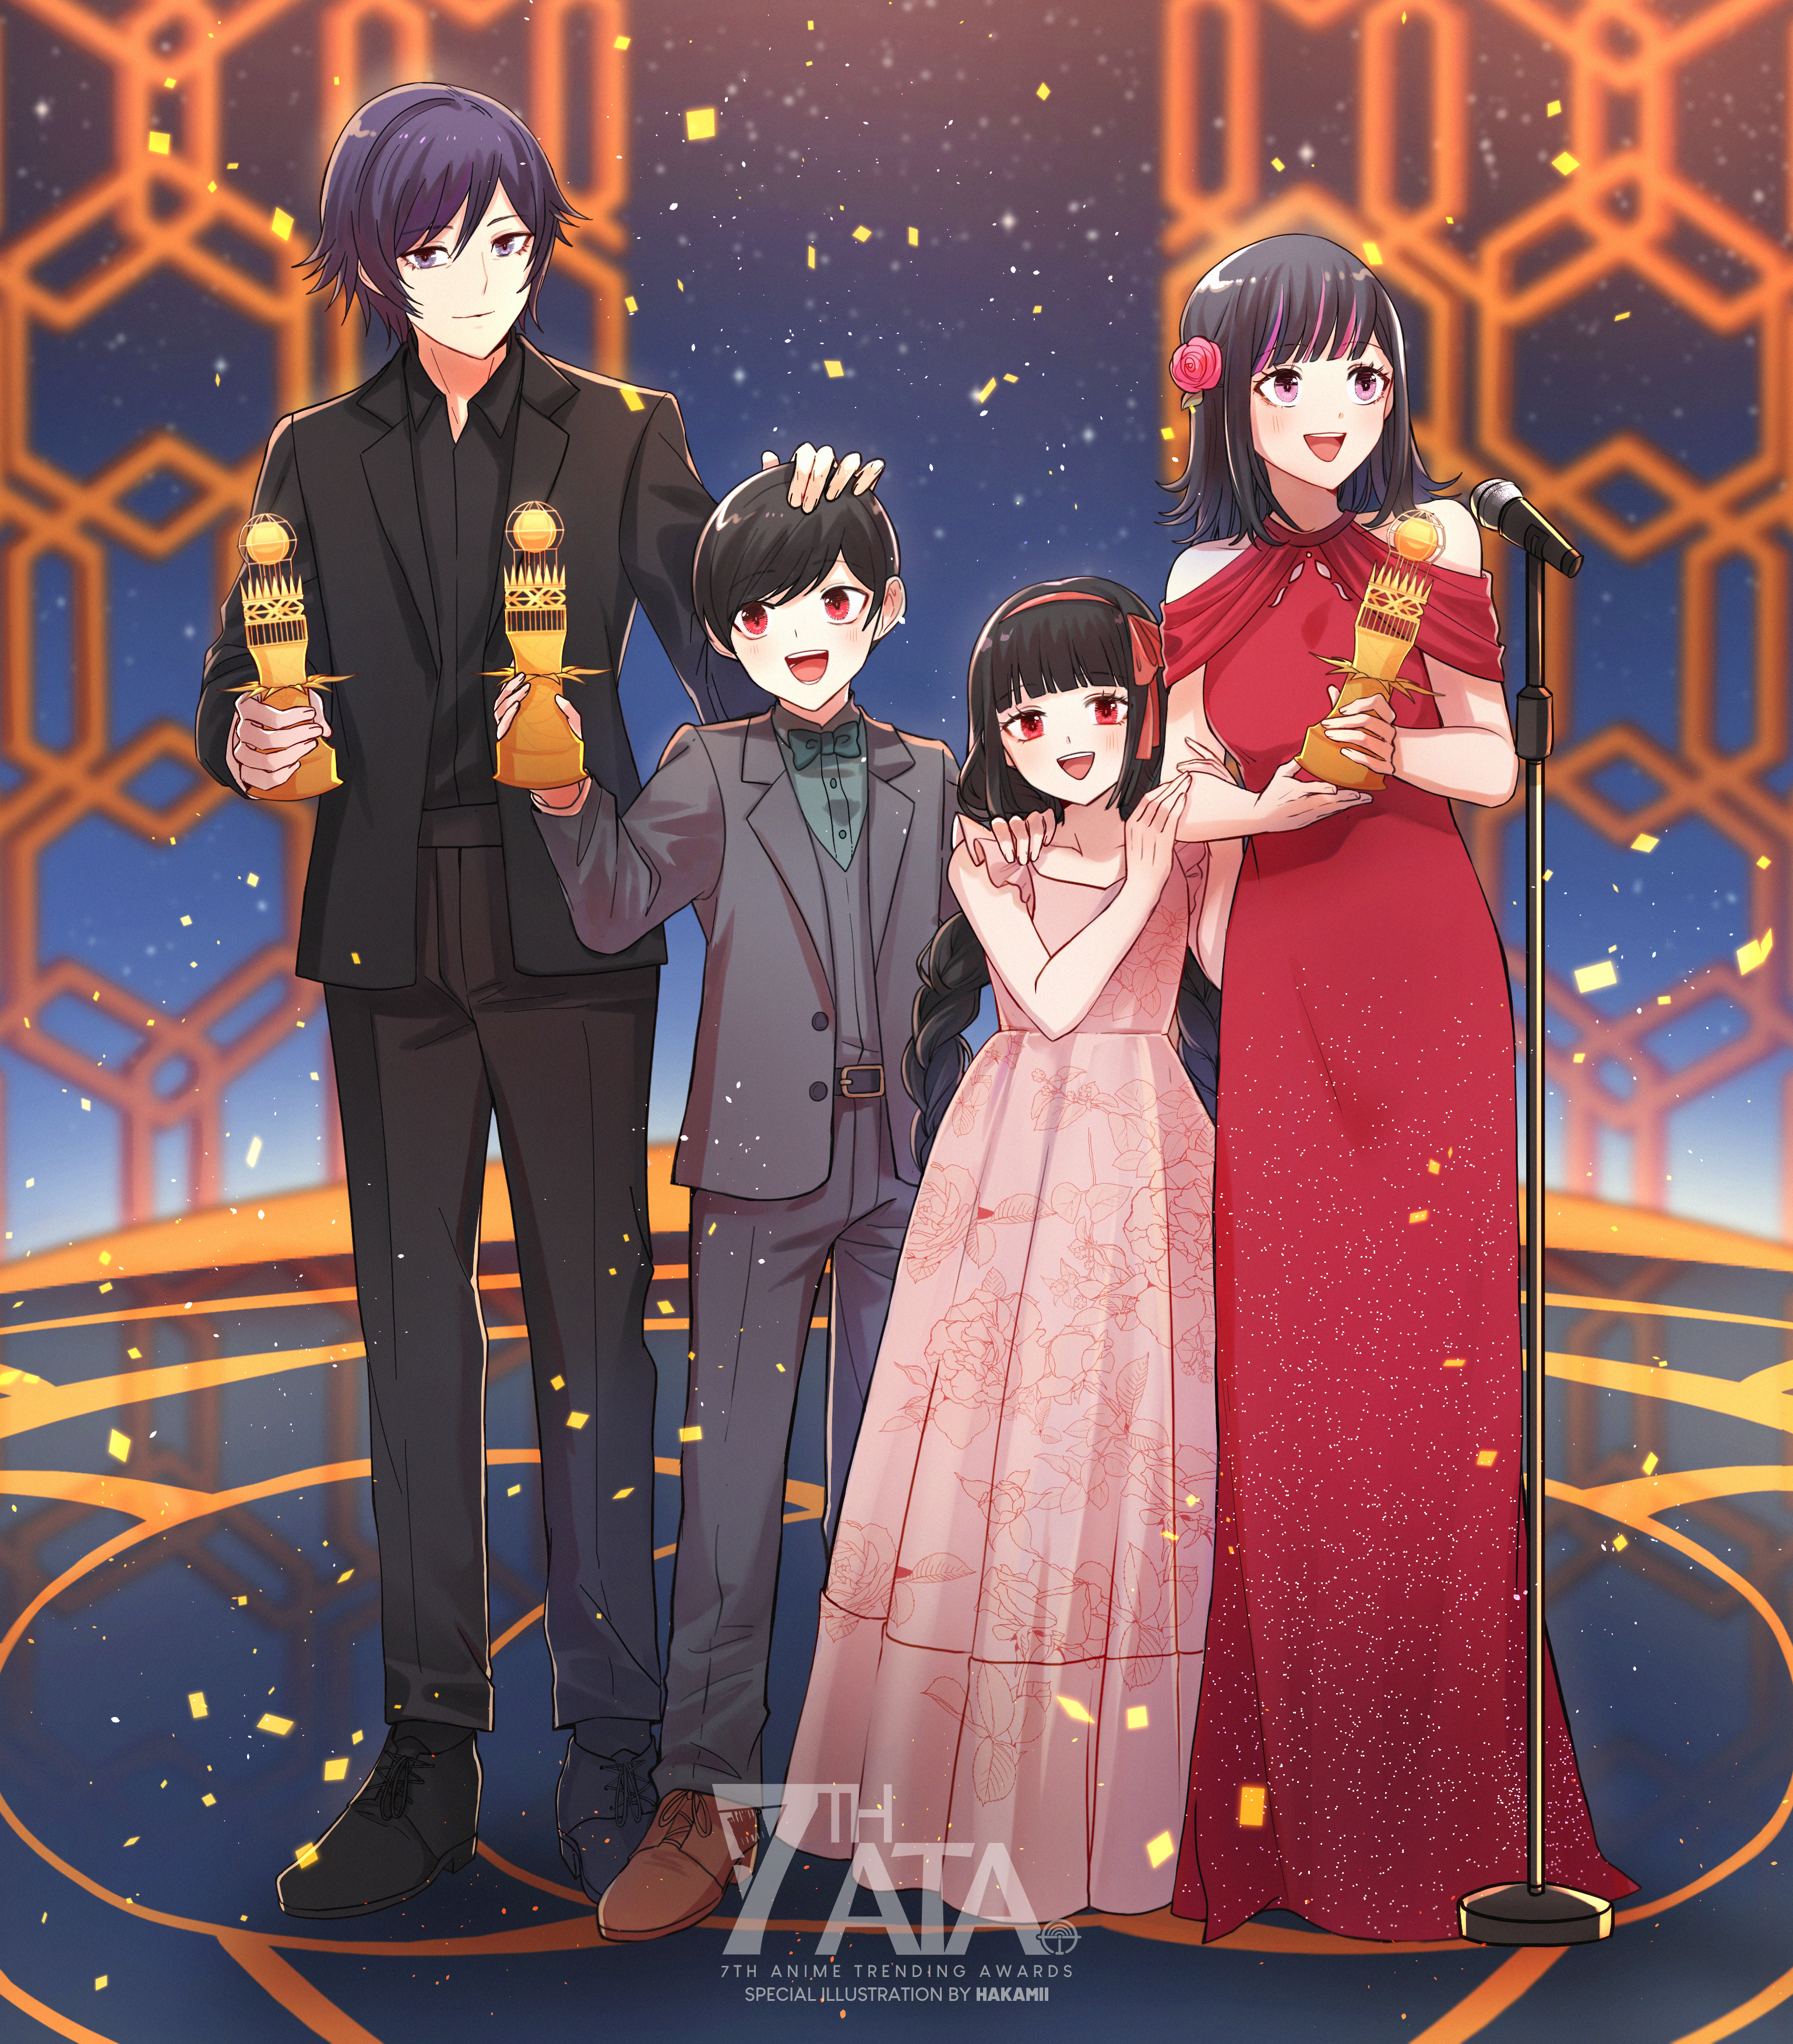 Akudama Drive clinches Anime of the Year at the 7th Anime Trending Awards